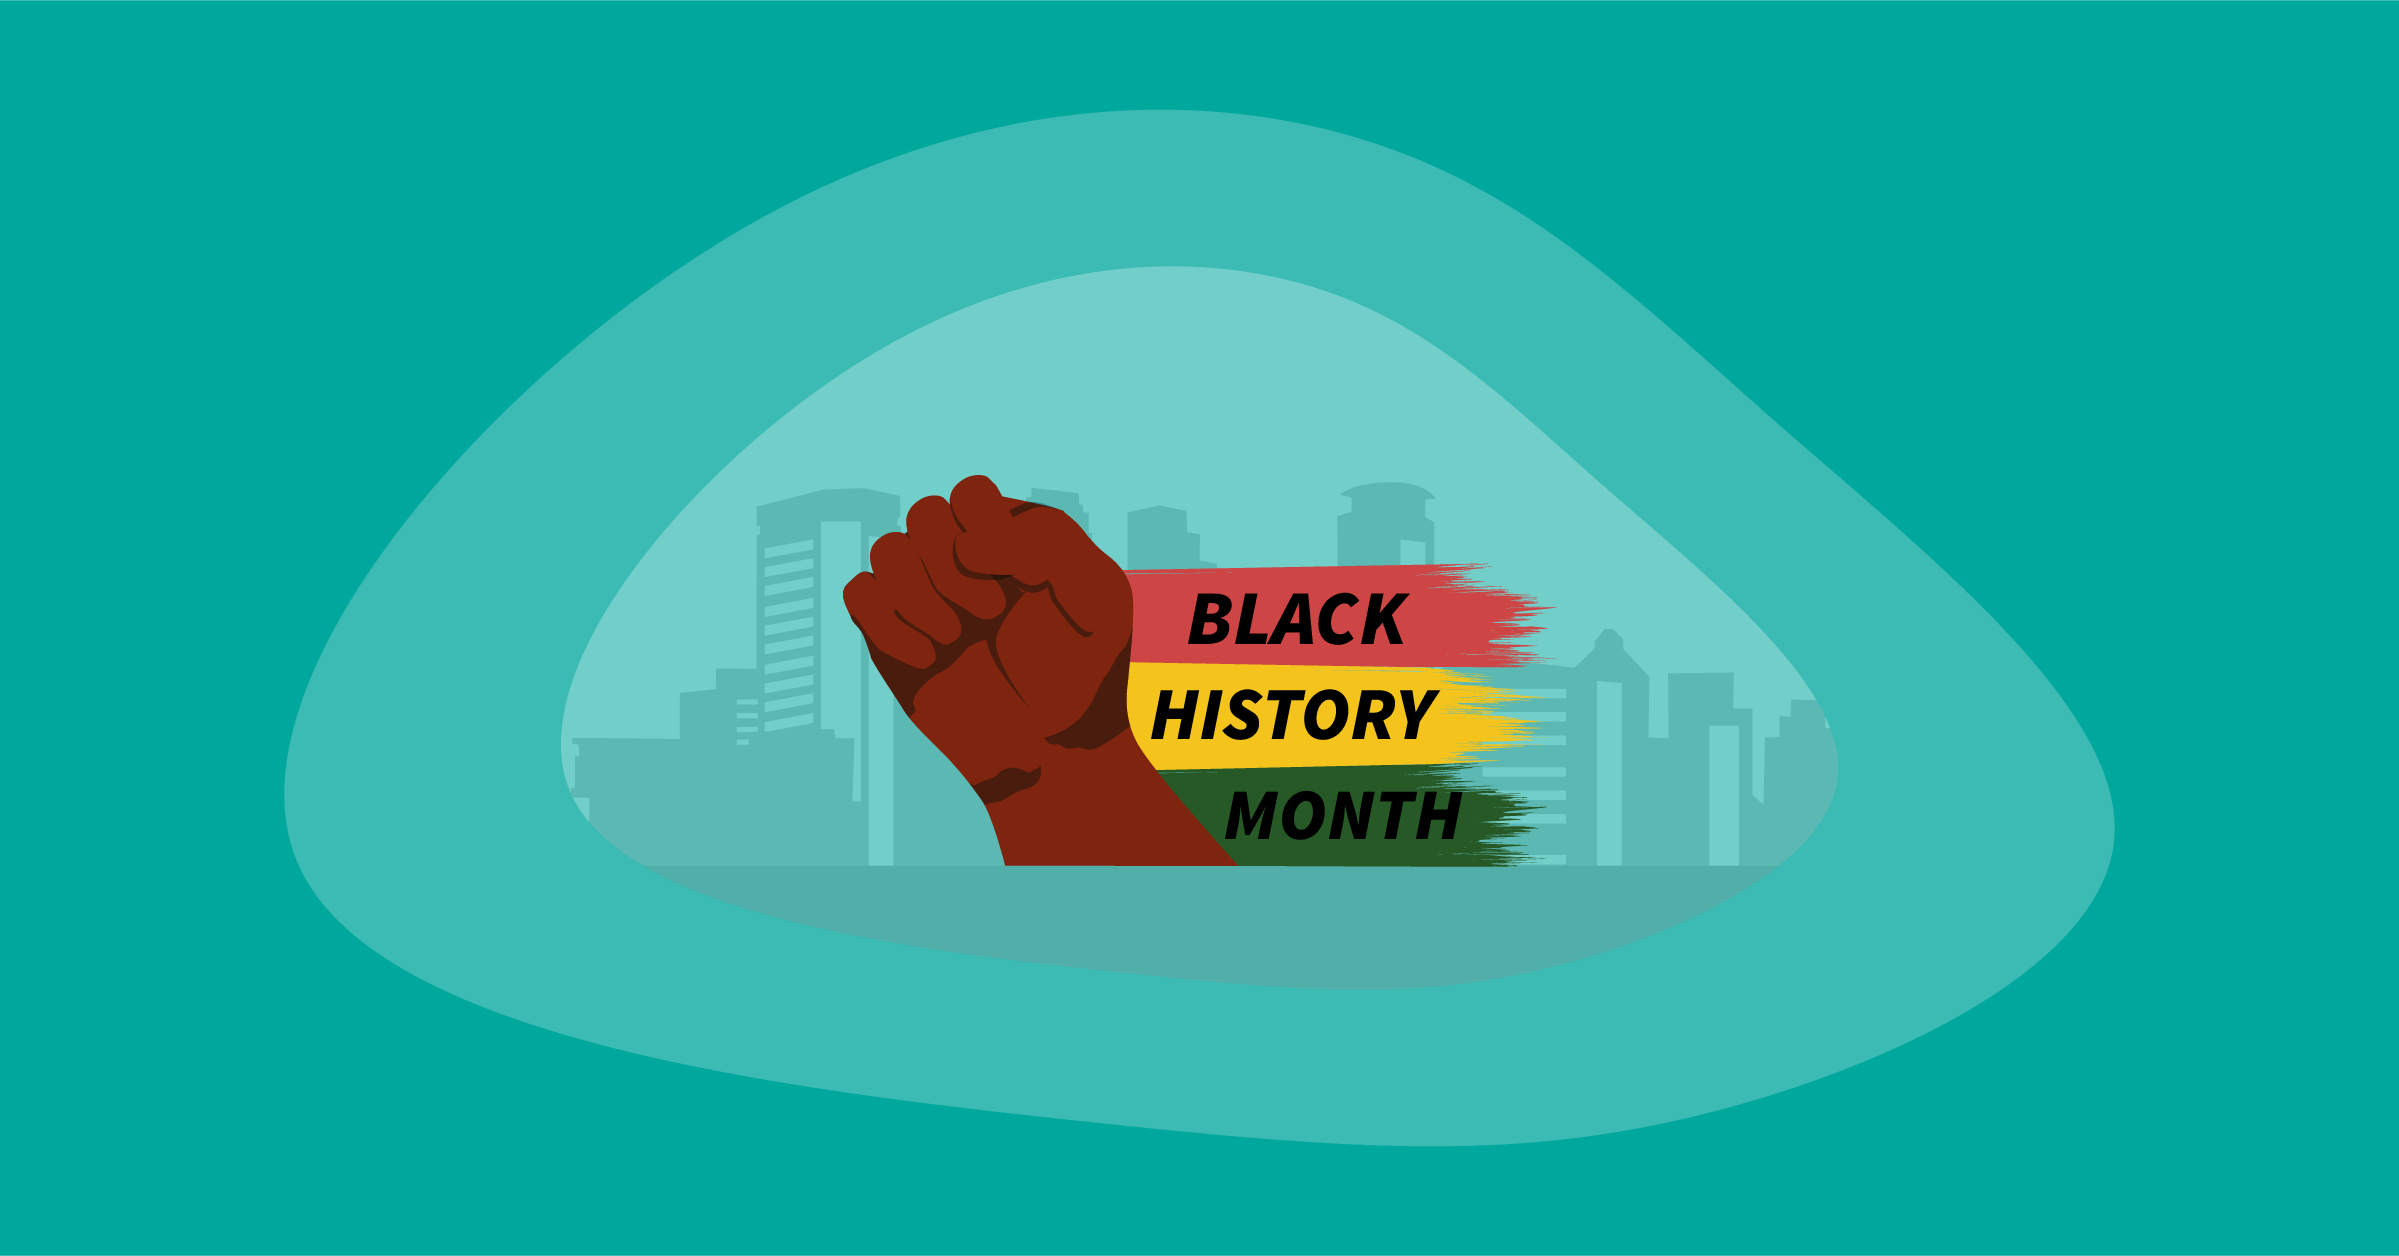 Illustration for this year's black history month